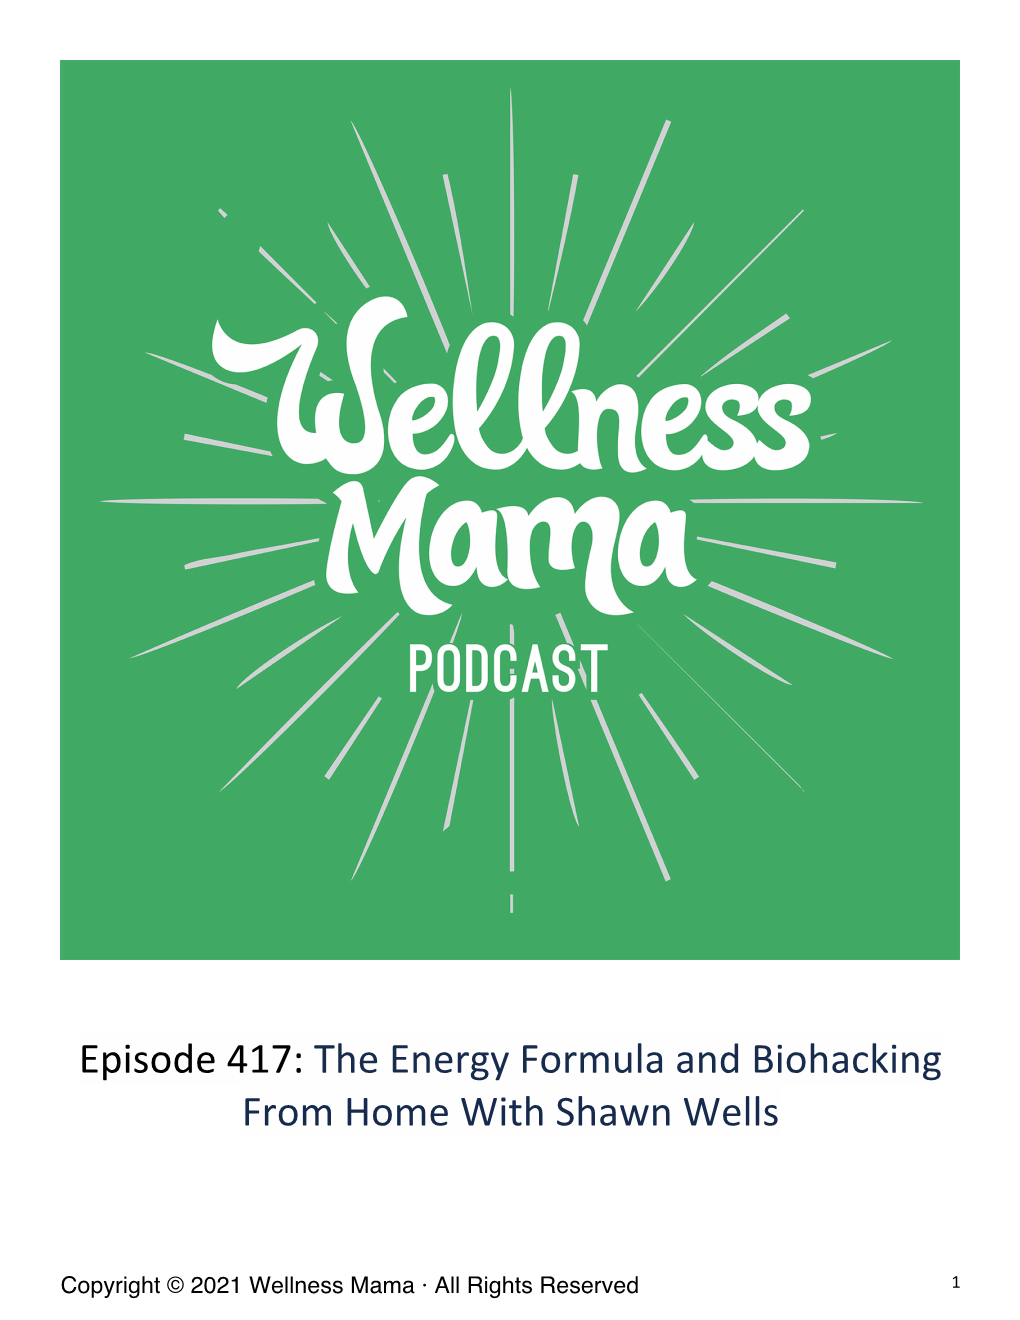 Episode 417: the Energy Formula and Biohacking from Home with Shawn Wells